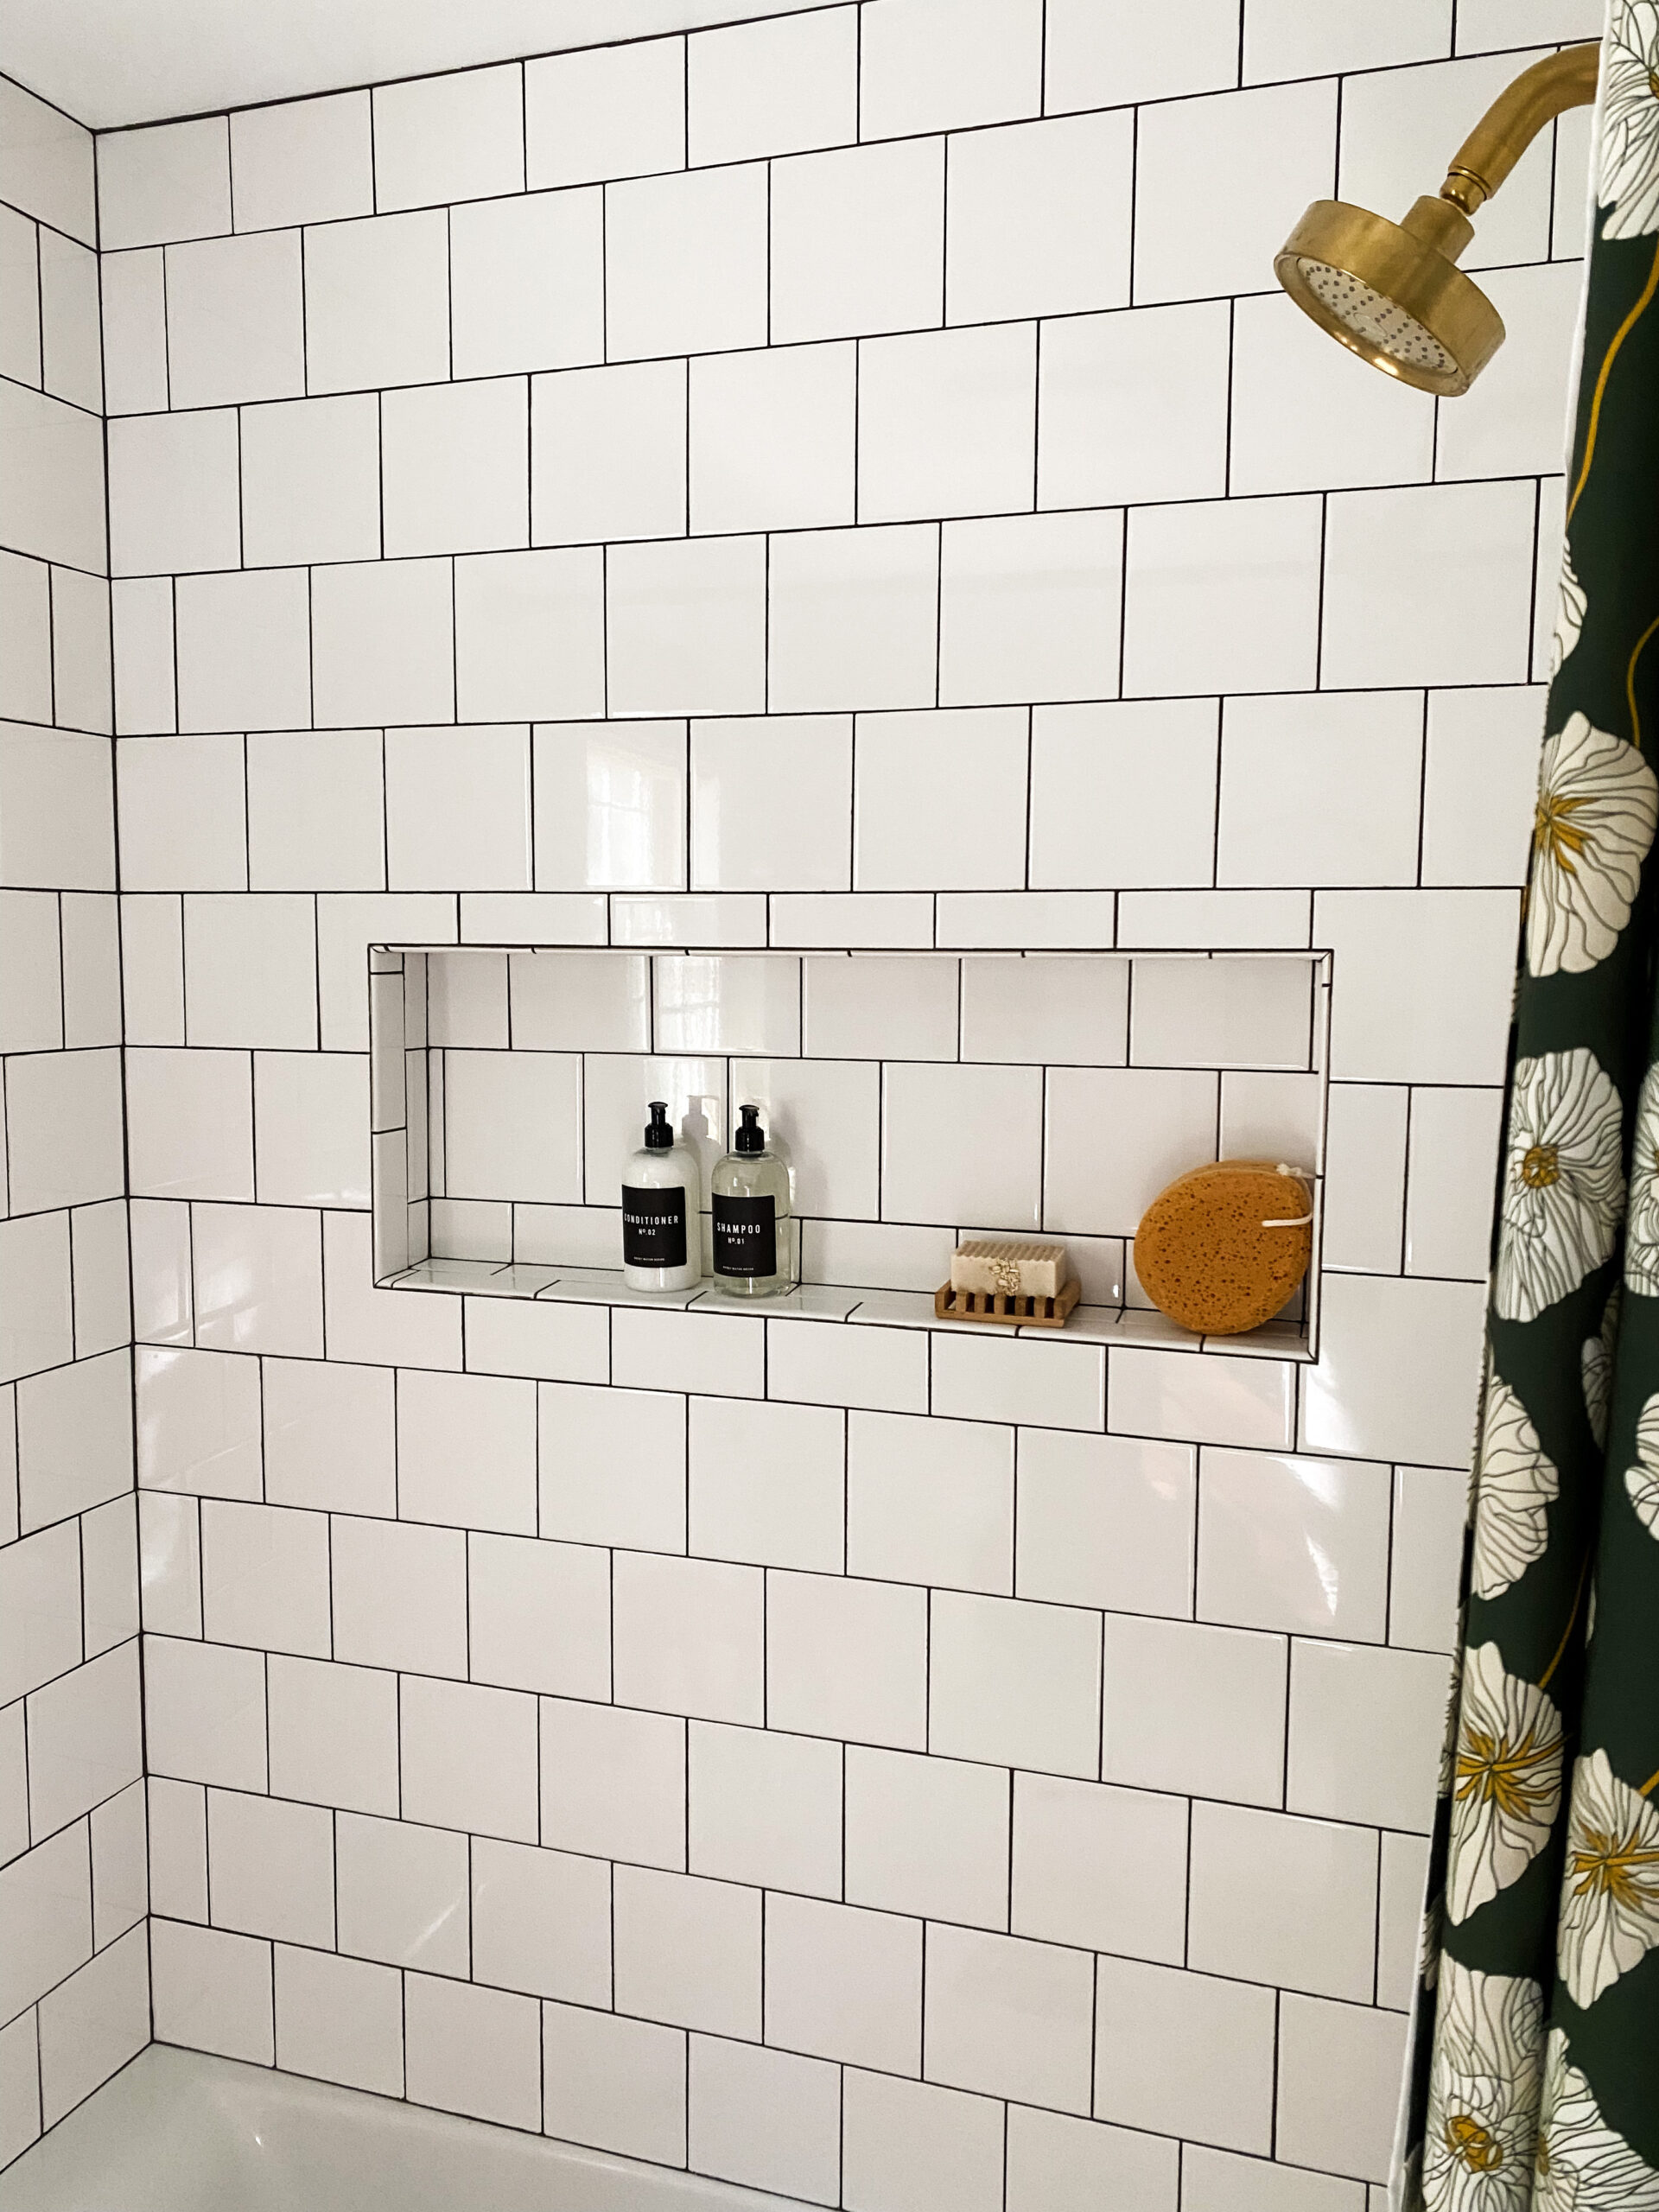 We saved on this affordable tile that I love!